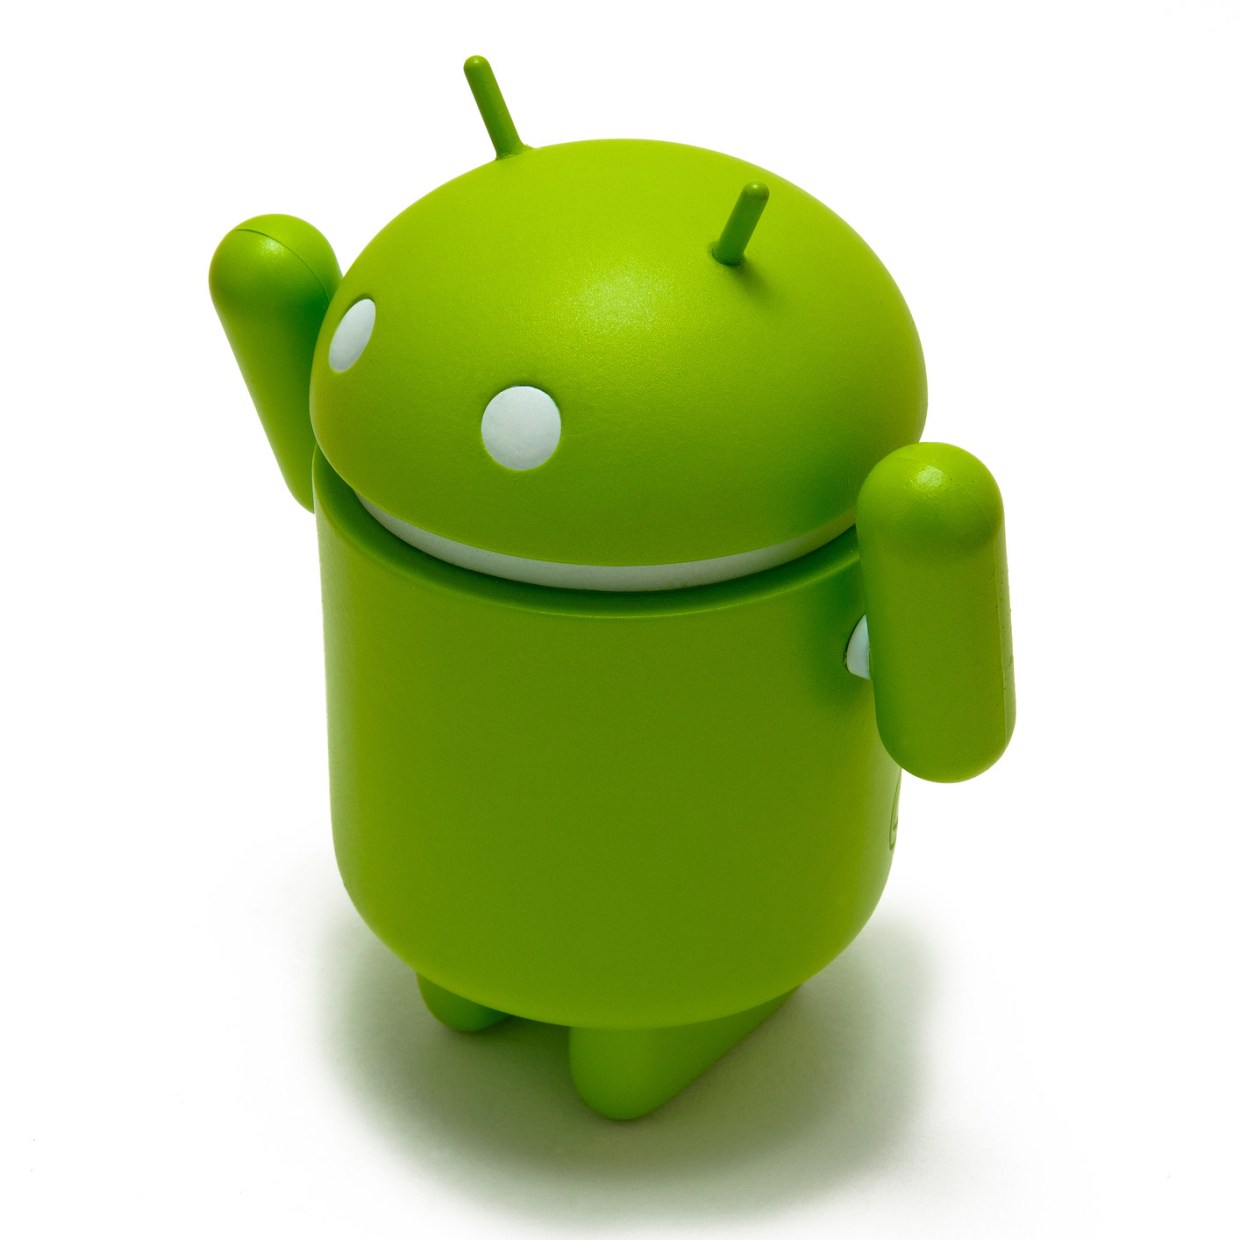 Android features used maliciously